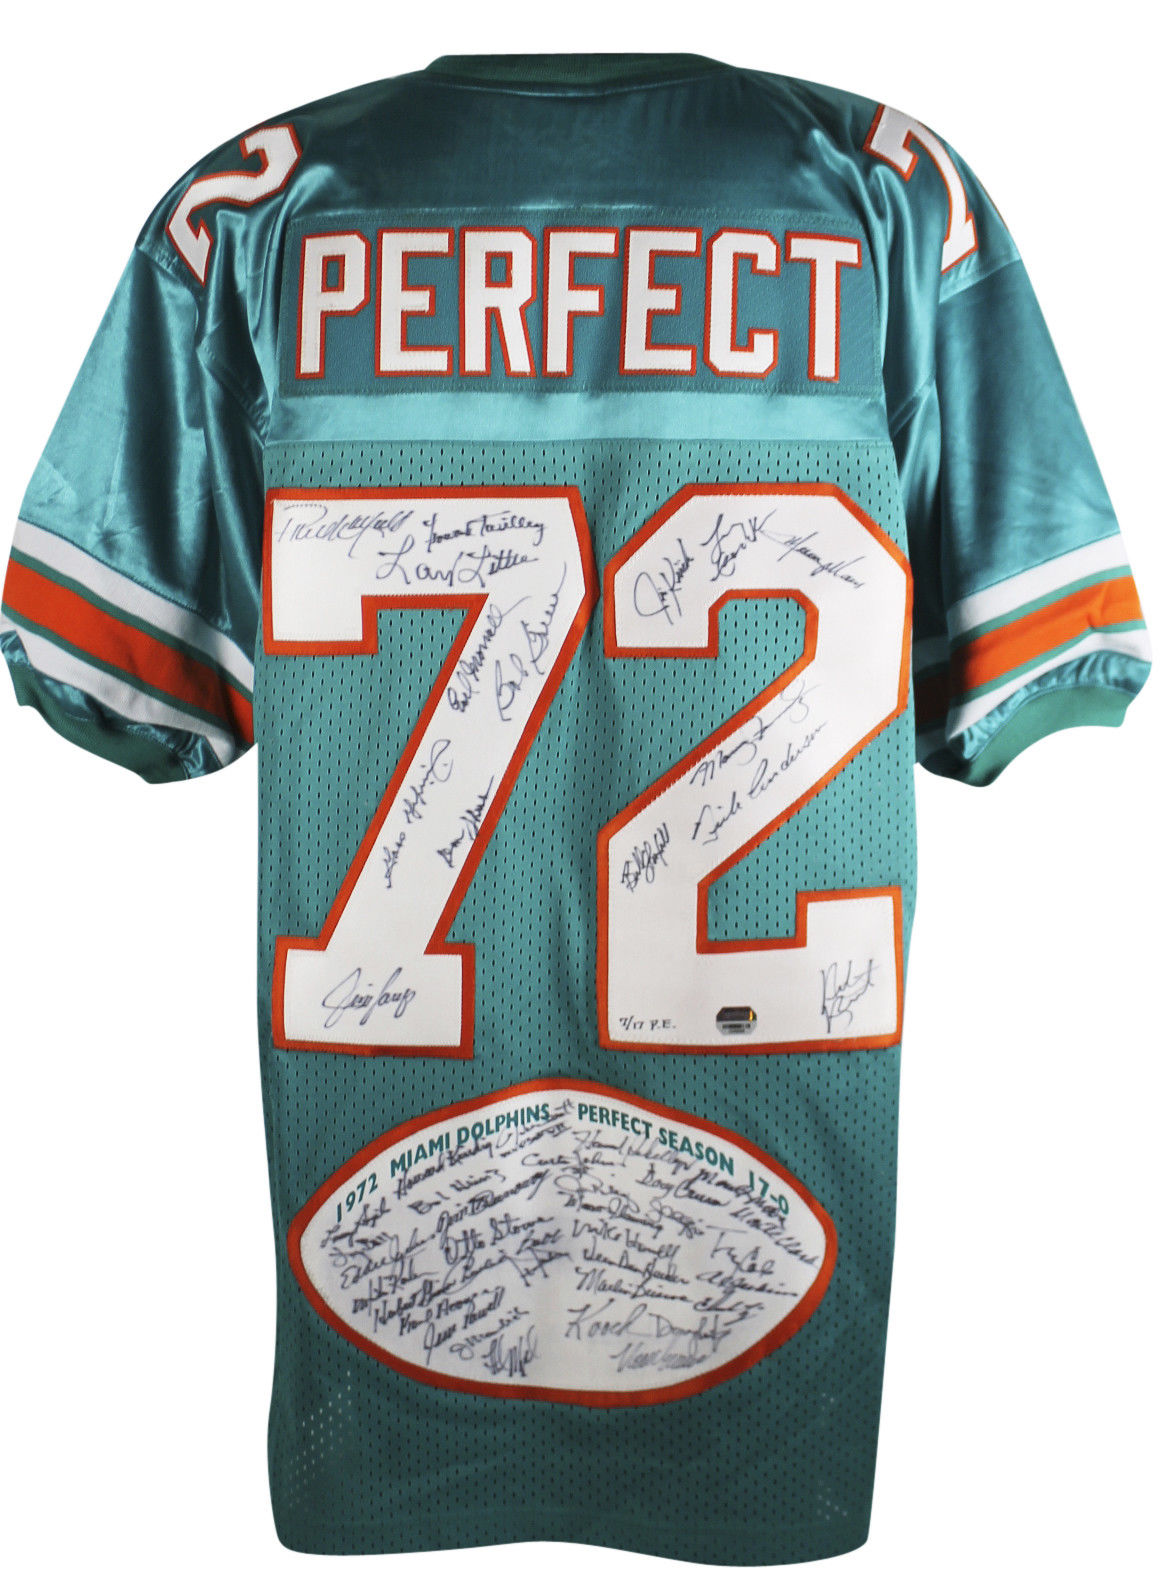 1972 miami dolphins jersey